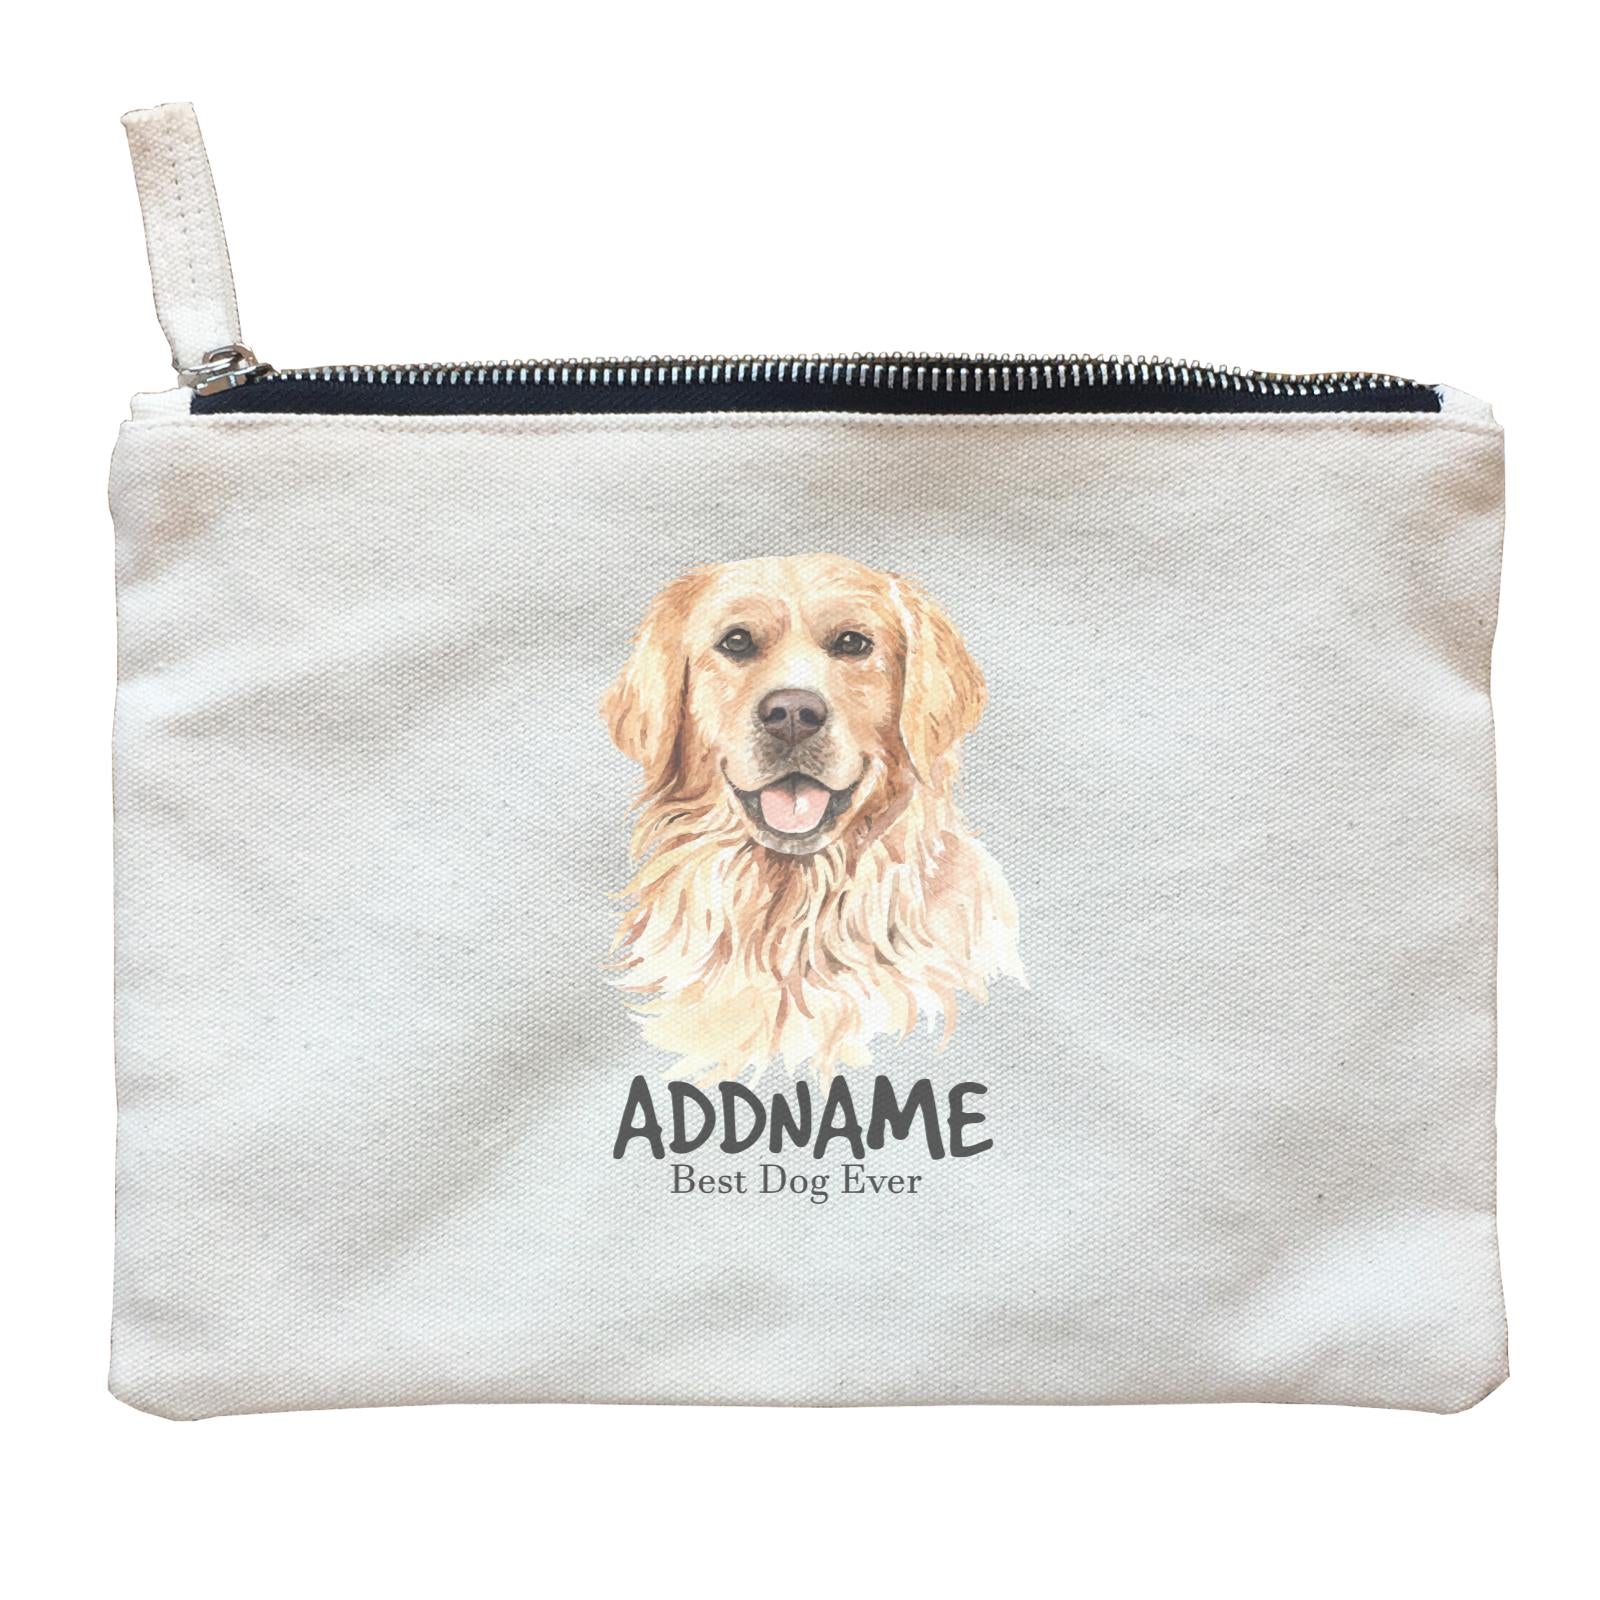 Watercolor Dog Golden Retriever Happy Best Dog Ever Addname Zipper Pouch